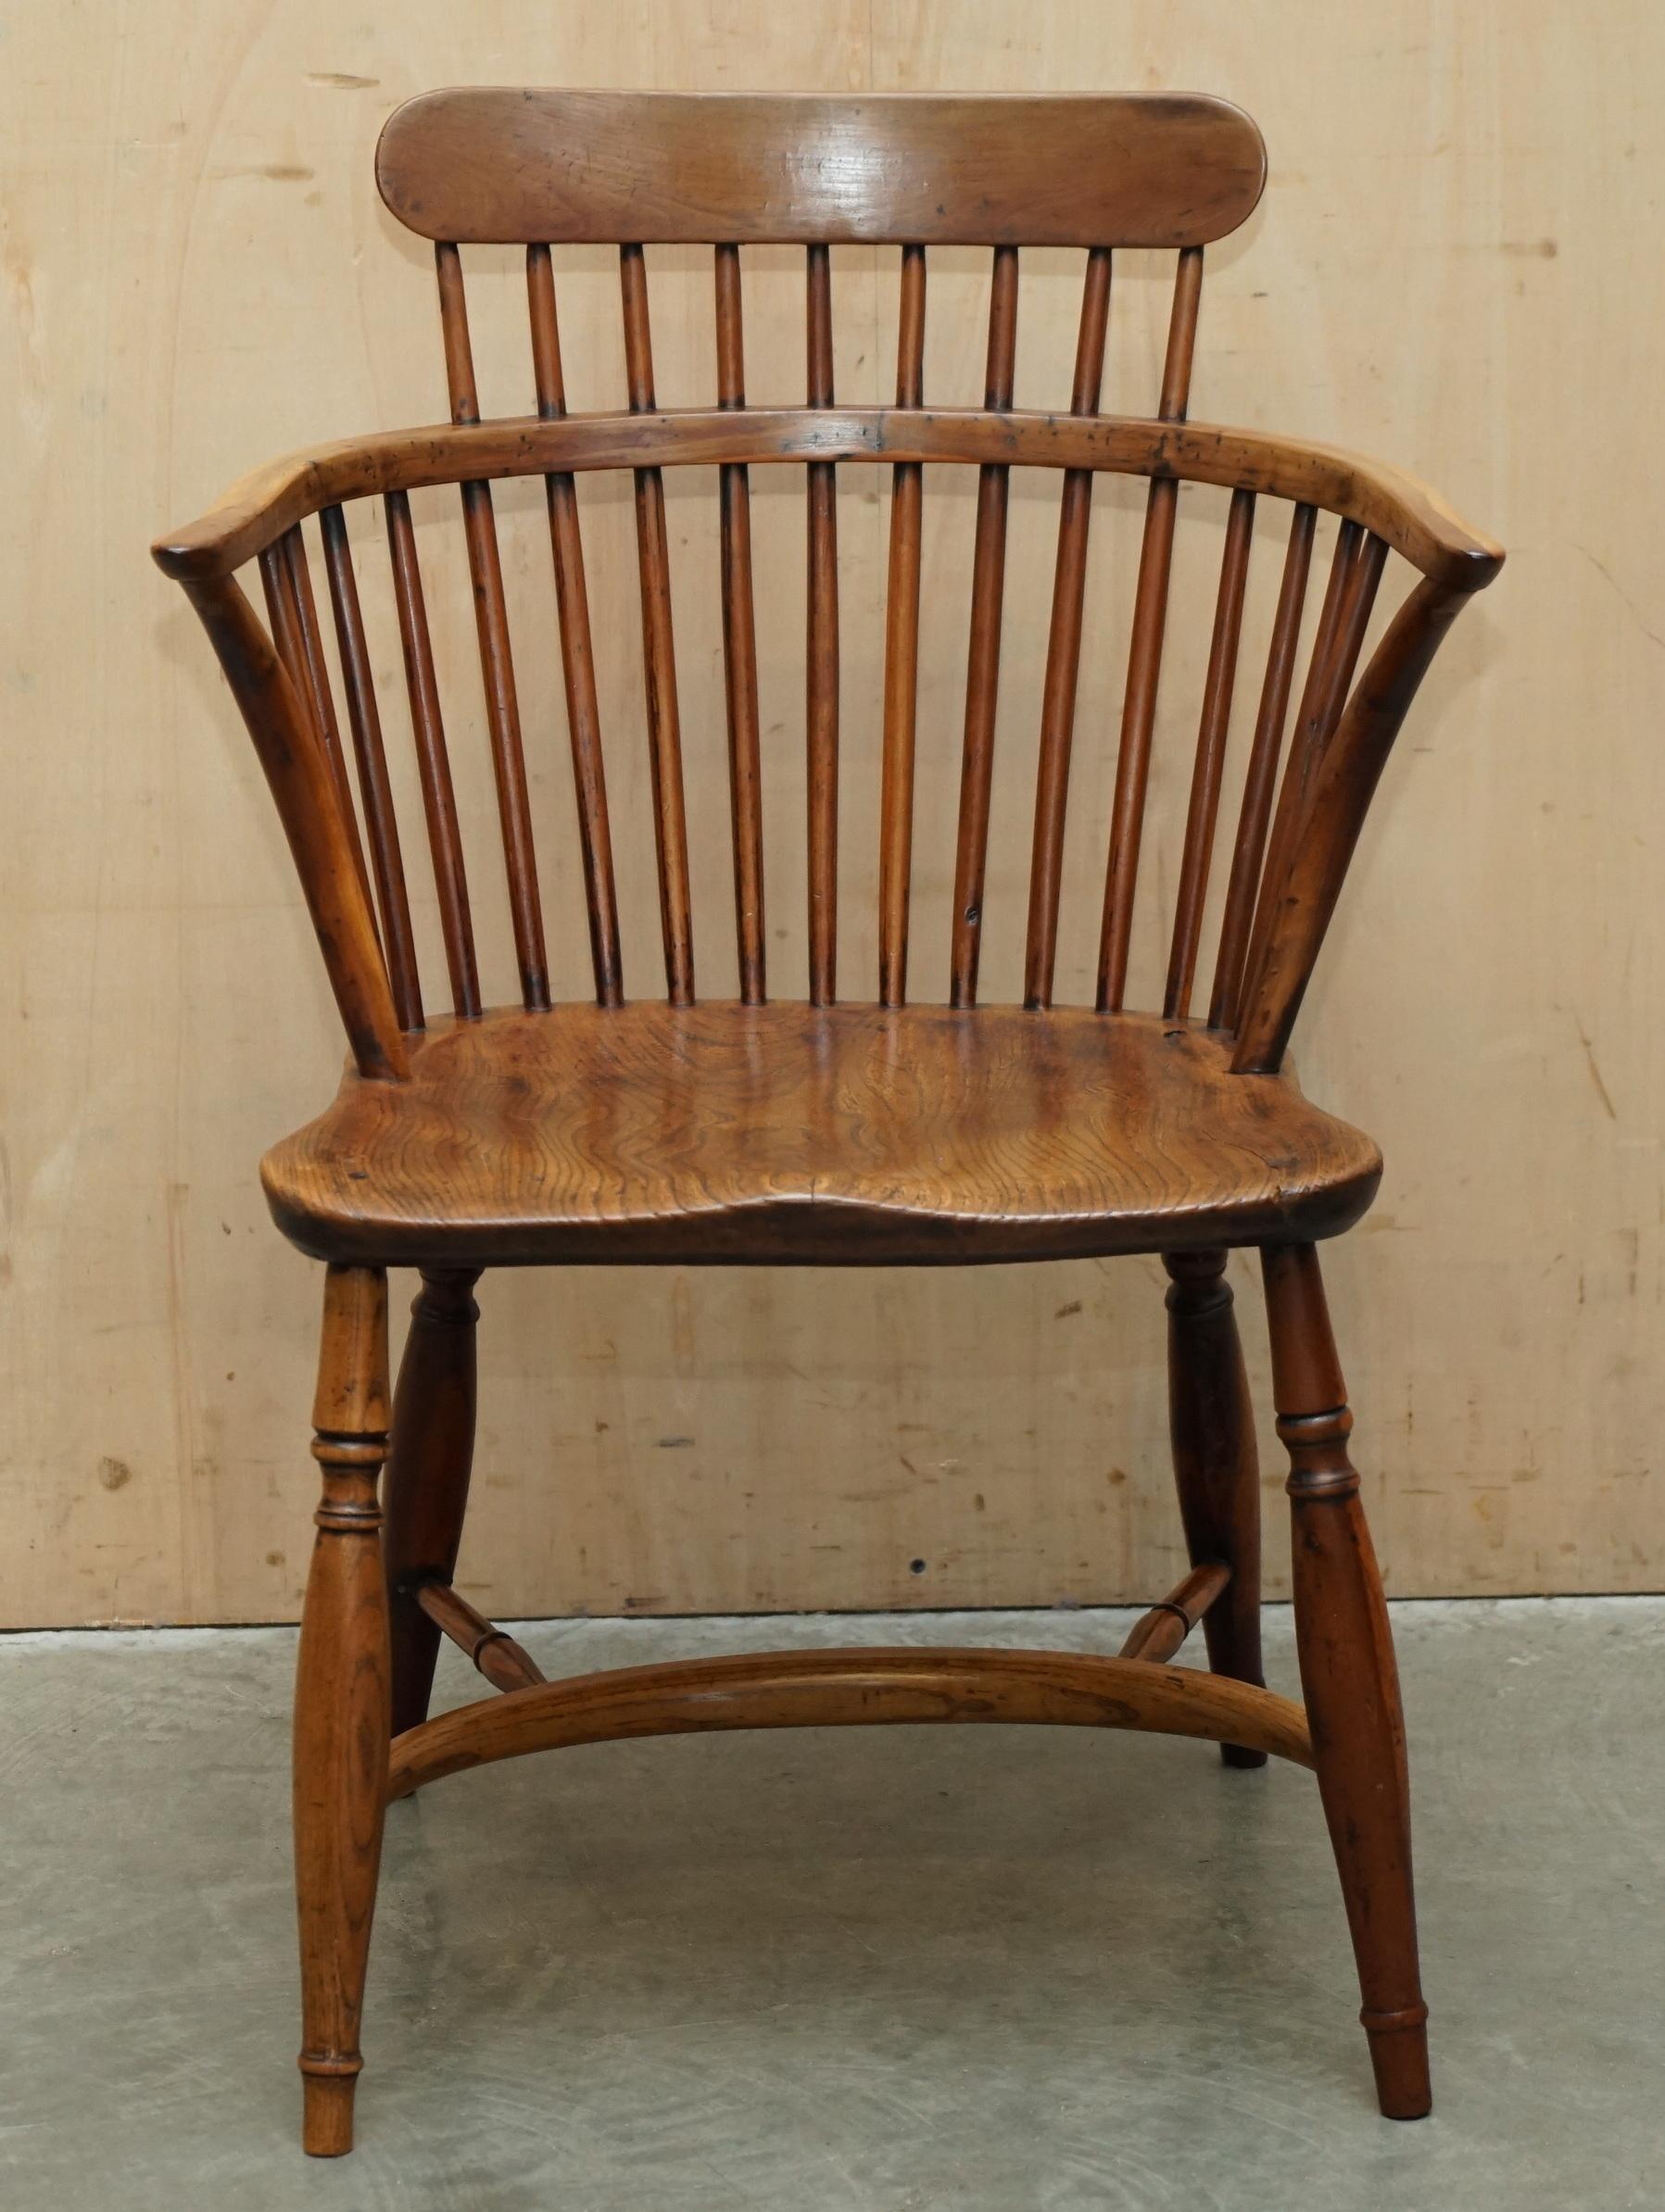 Royal House Antiques

Royal House Antiques is delighted to offer for sale this absolutely sublime early 19th century circa Yew wood & Elm Comb back Windsor armchair.

Please note the delivery fee listed is just a guide, it covers within the M25 only